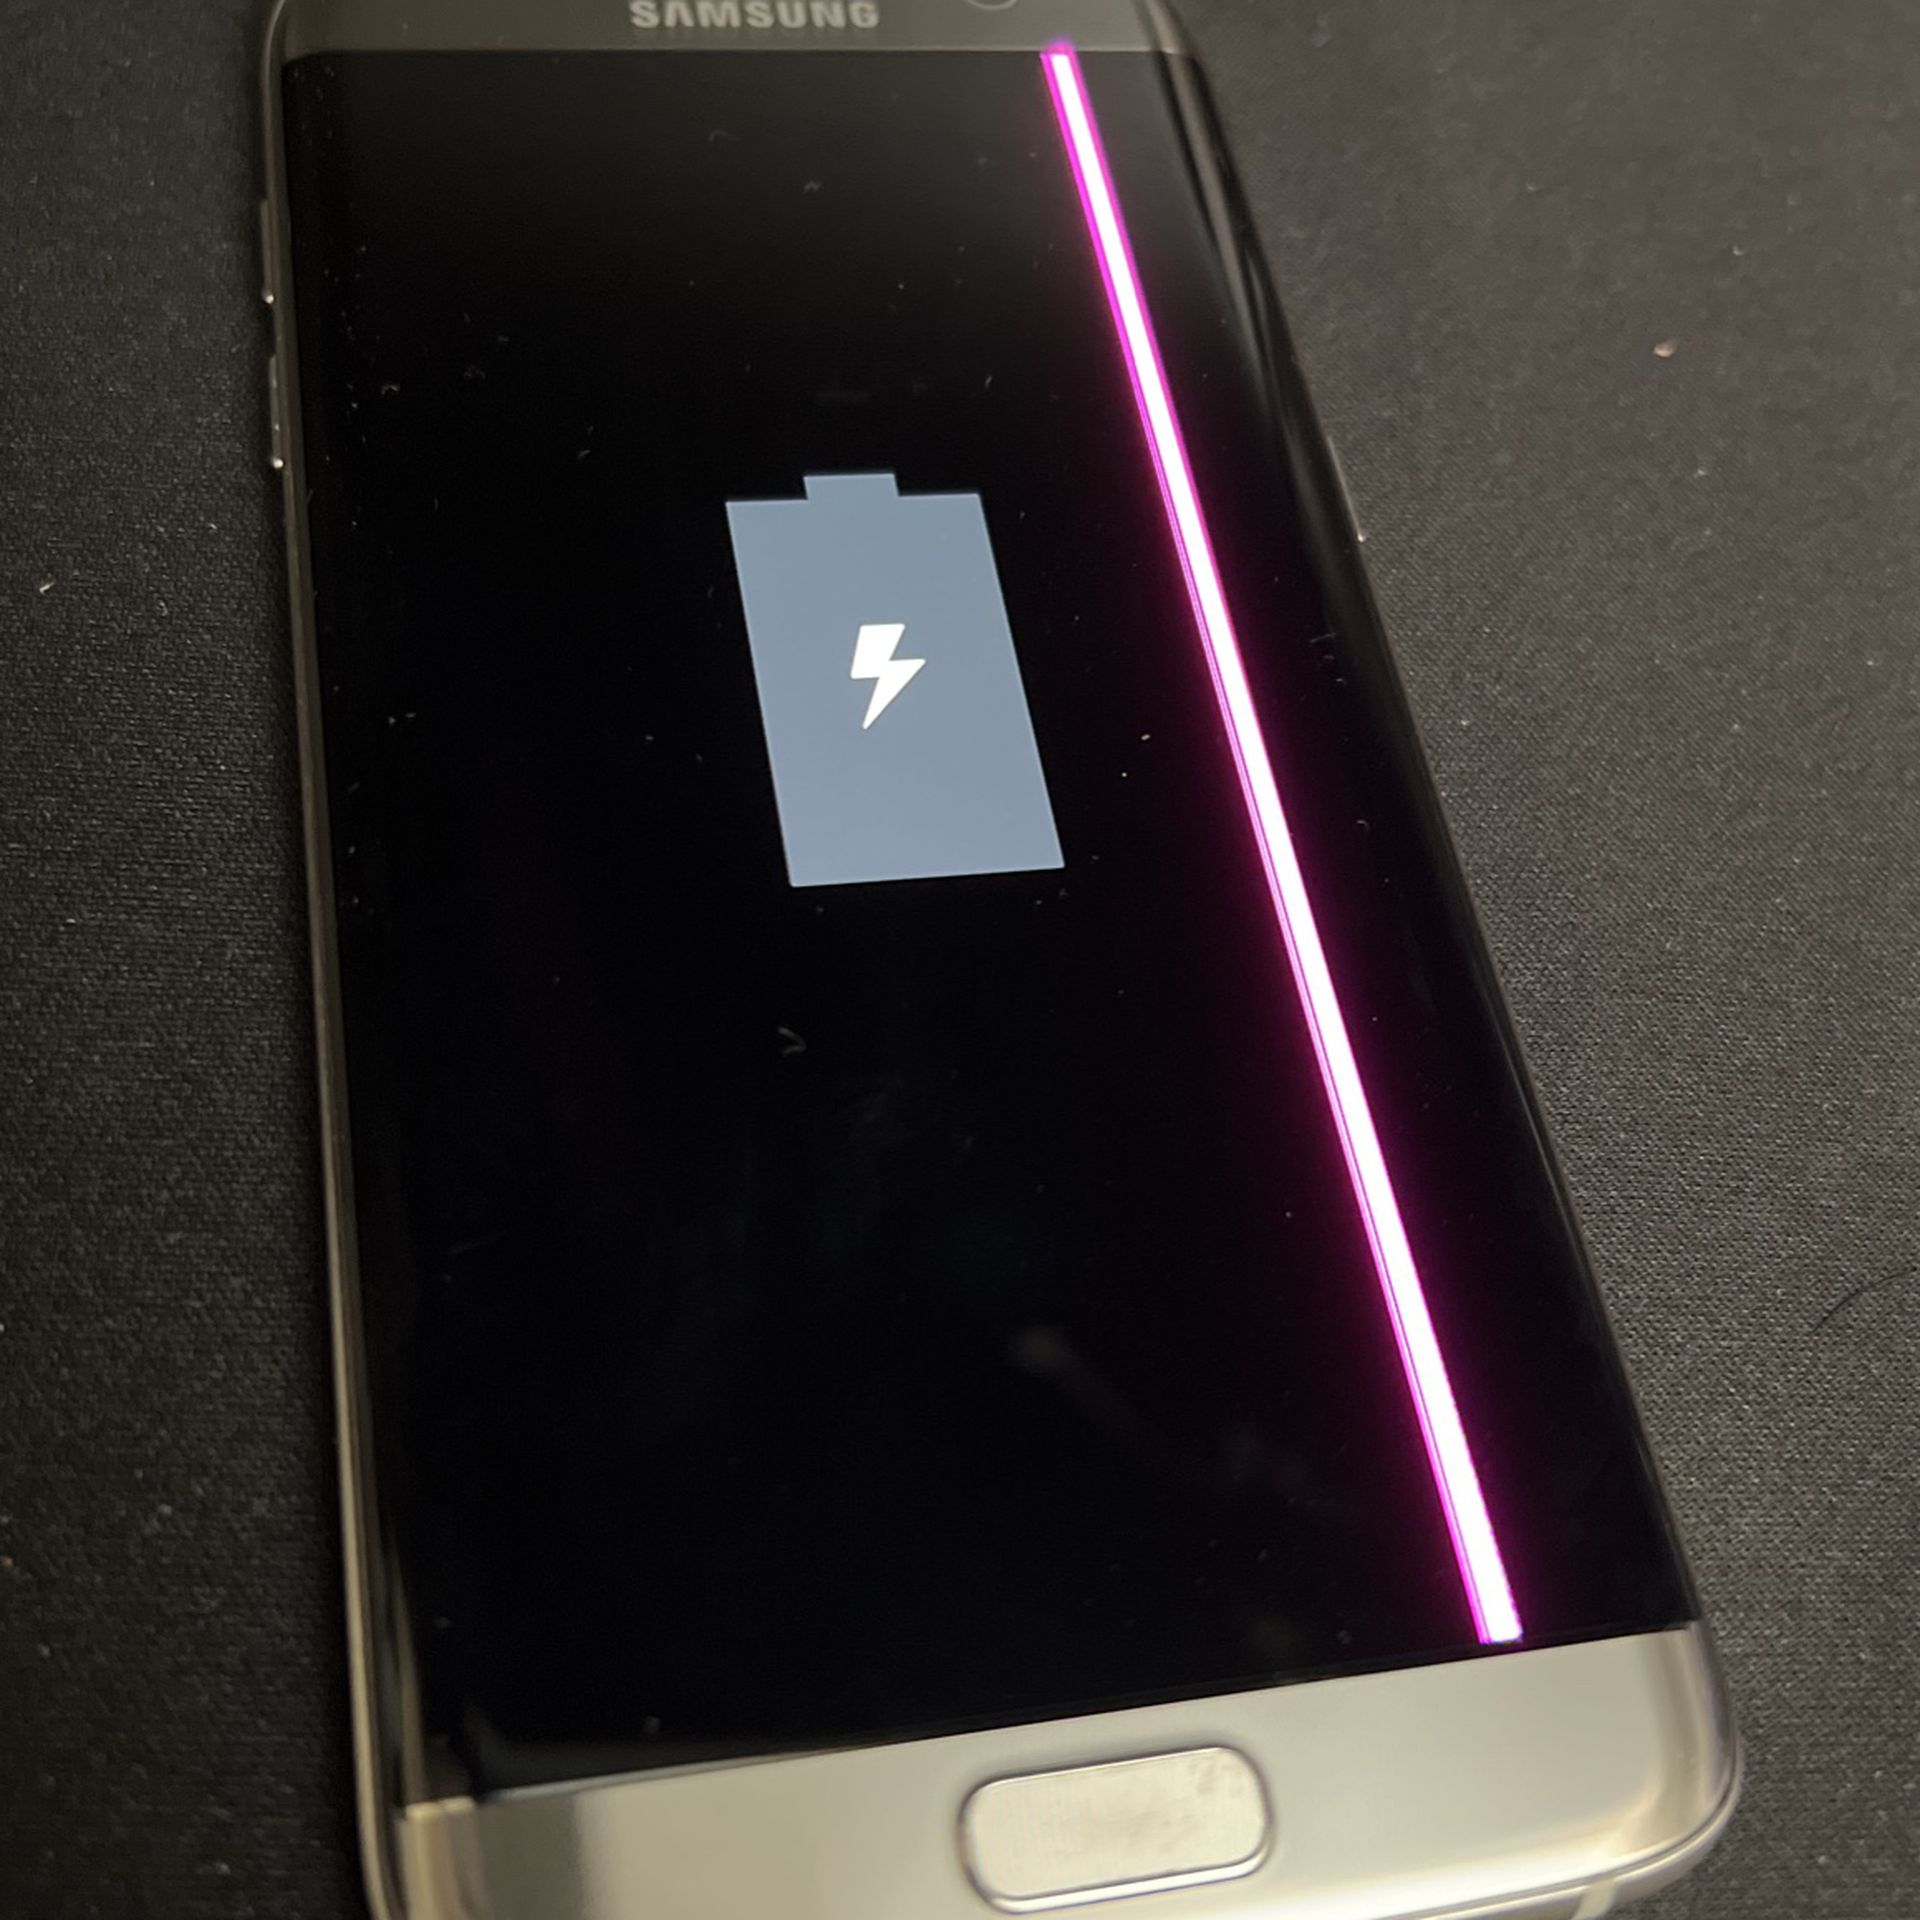 Samsung S7 Edge Unlocked. Screen Defect With Pink Line.